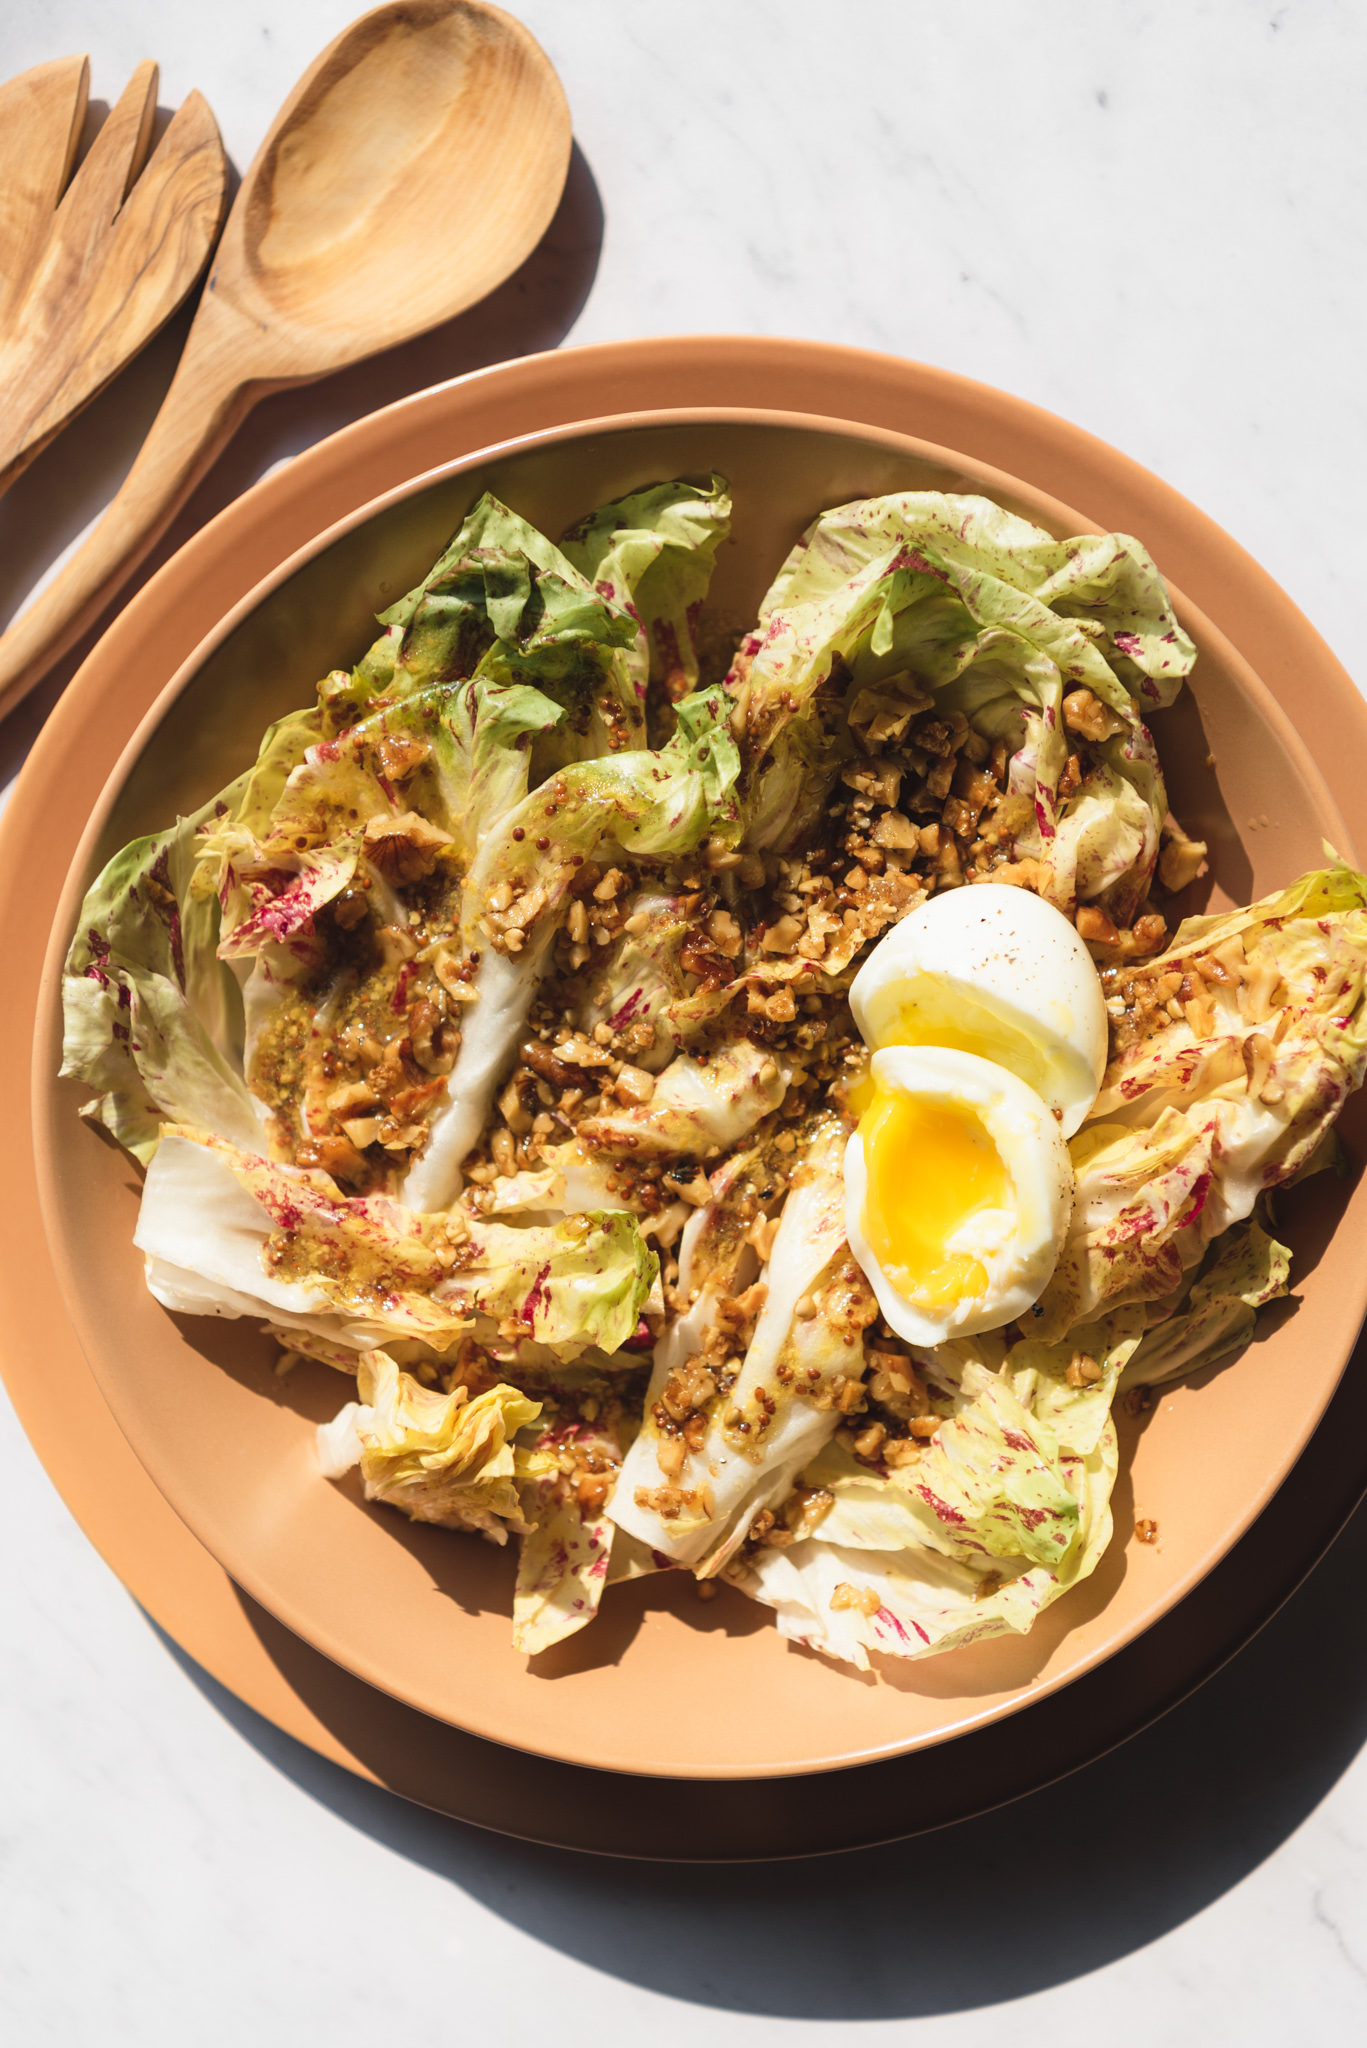 radicchio salad with walnut and mustard vinaigrette and soft boiled egg